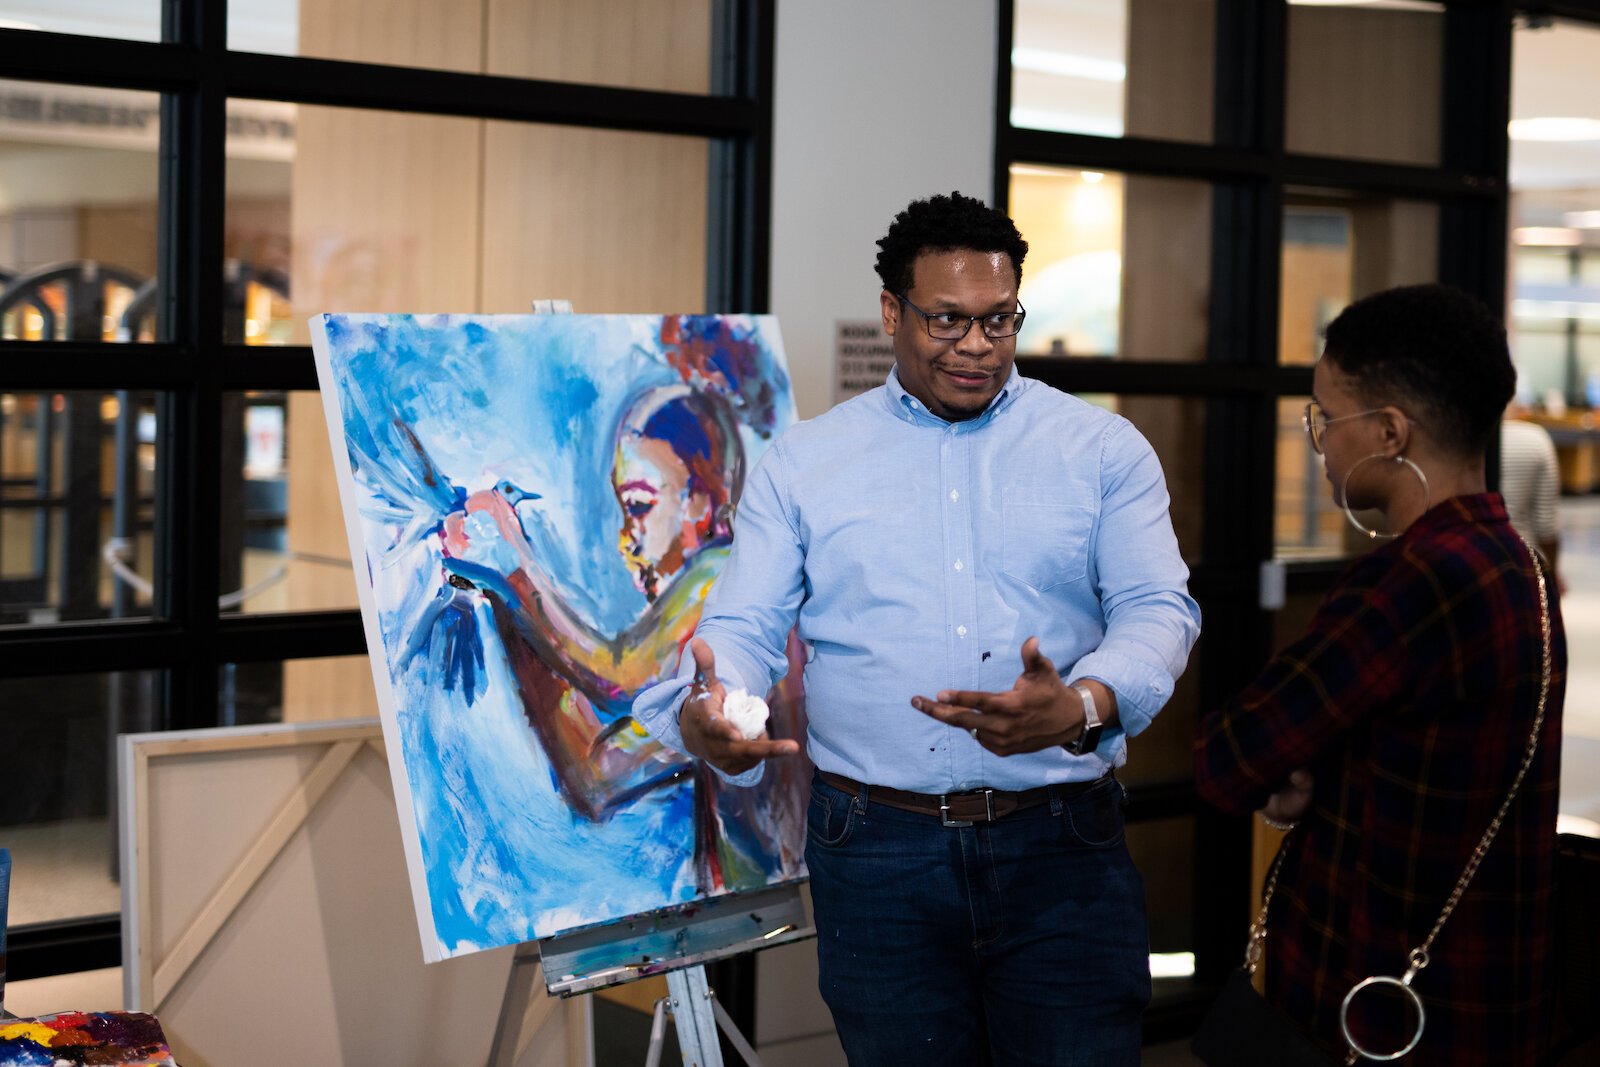 Artist Theopolis Smith III speaks about his painting to an attendee at the gallery.